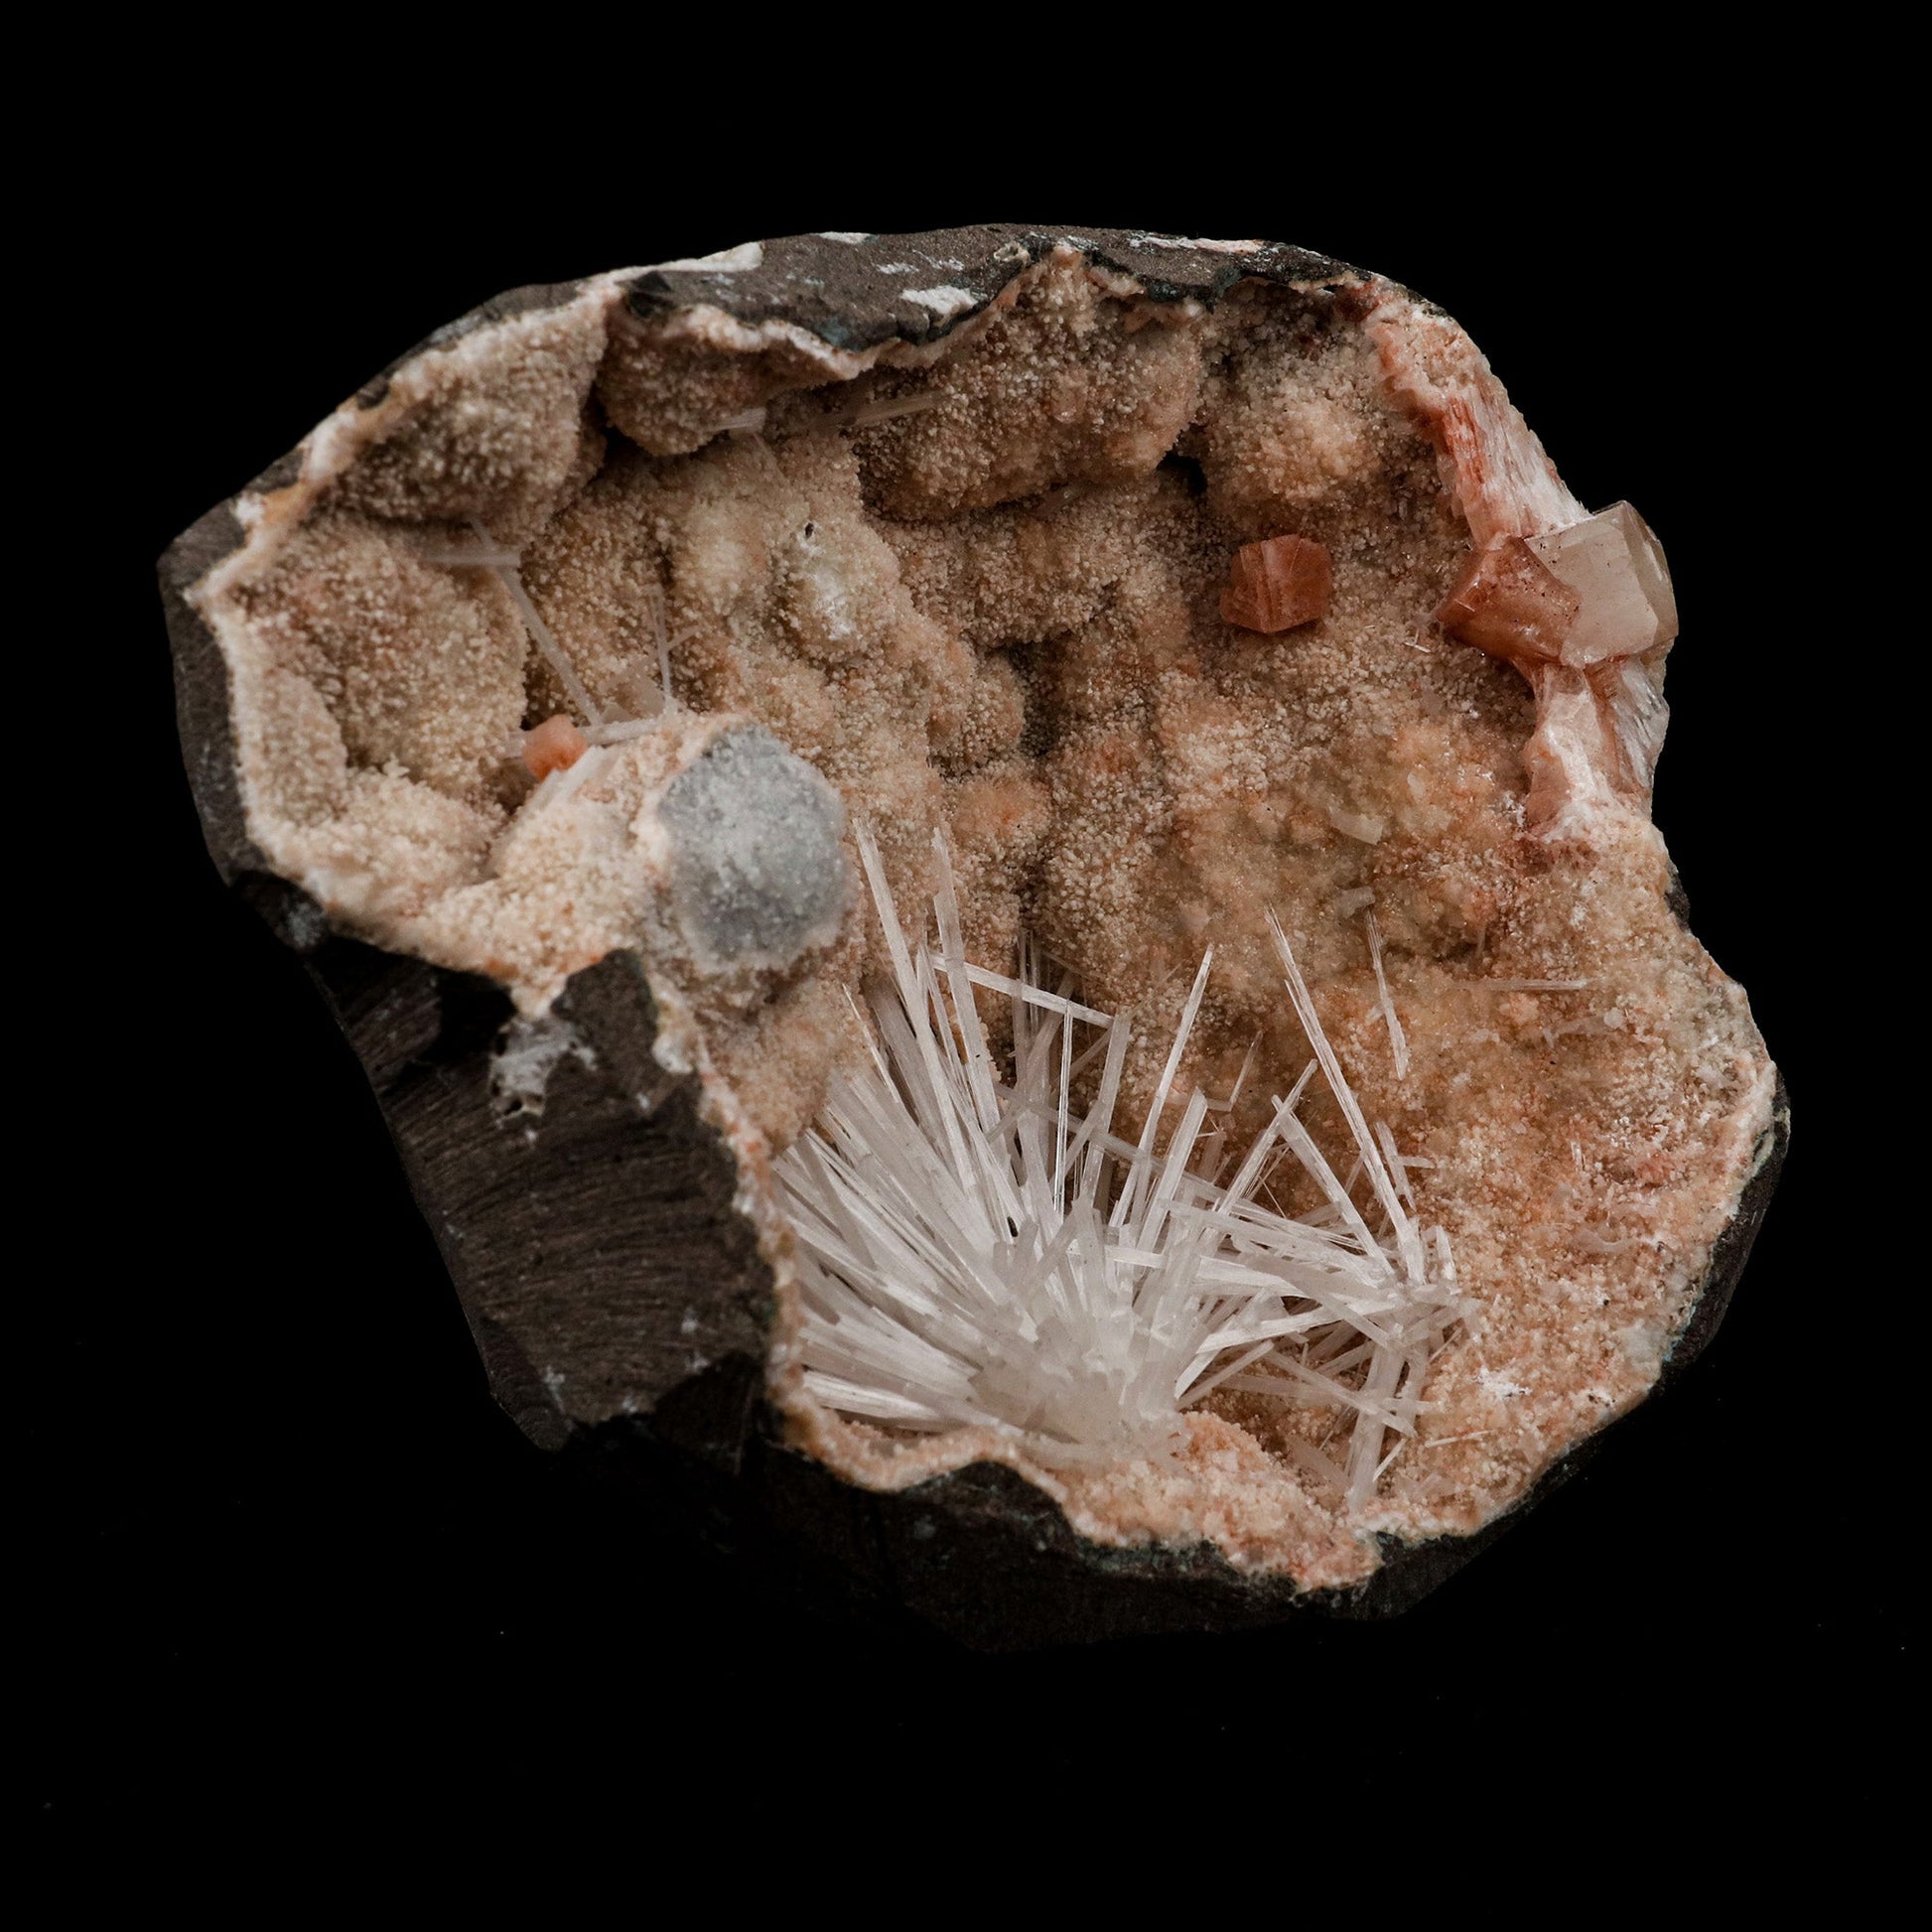 Scolecite Sprays Fan Inside Heulandite Geode Natural Mineral Specimen …  https://www.superbminerals.us/products/scolecite-sprays-fan-inside-heulandite-geode-natural-mineral-specimen-b-5133  Features: A large, free-standing Geode with peach-colored Heulandite crystals and two clusters of beige Stilbite crystals. The Geode is a three-dimensional entity that is tall, thin, and deep.Very nice and in excellent condition. Primary Mineral(s): Scolecite Secondary Mineral(s): N/AMatrix: Heulandite 